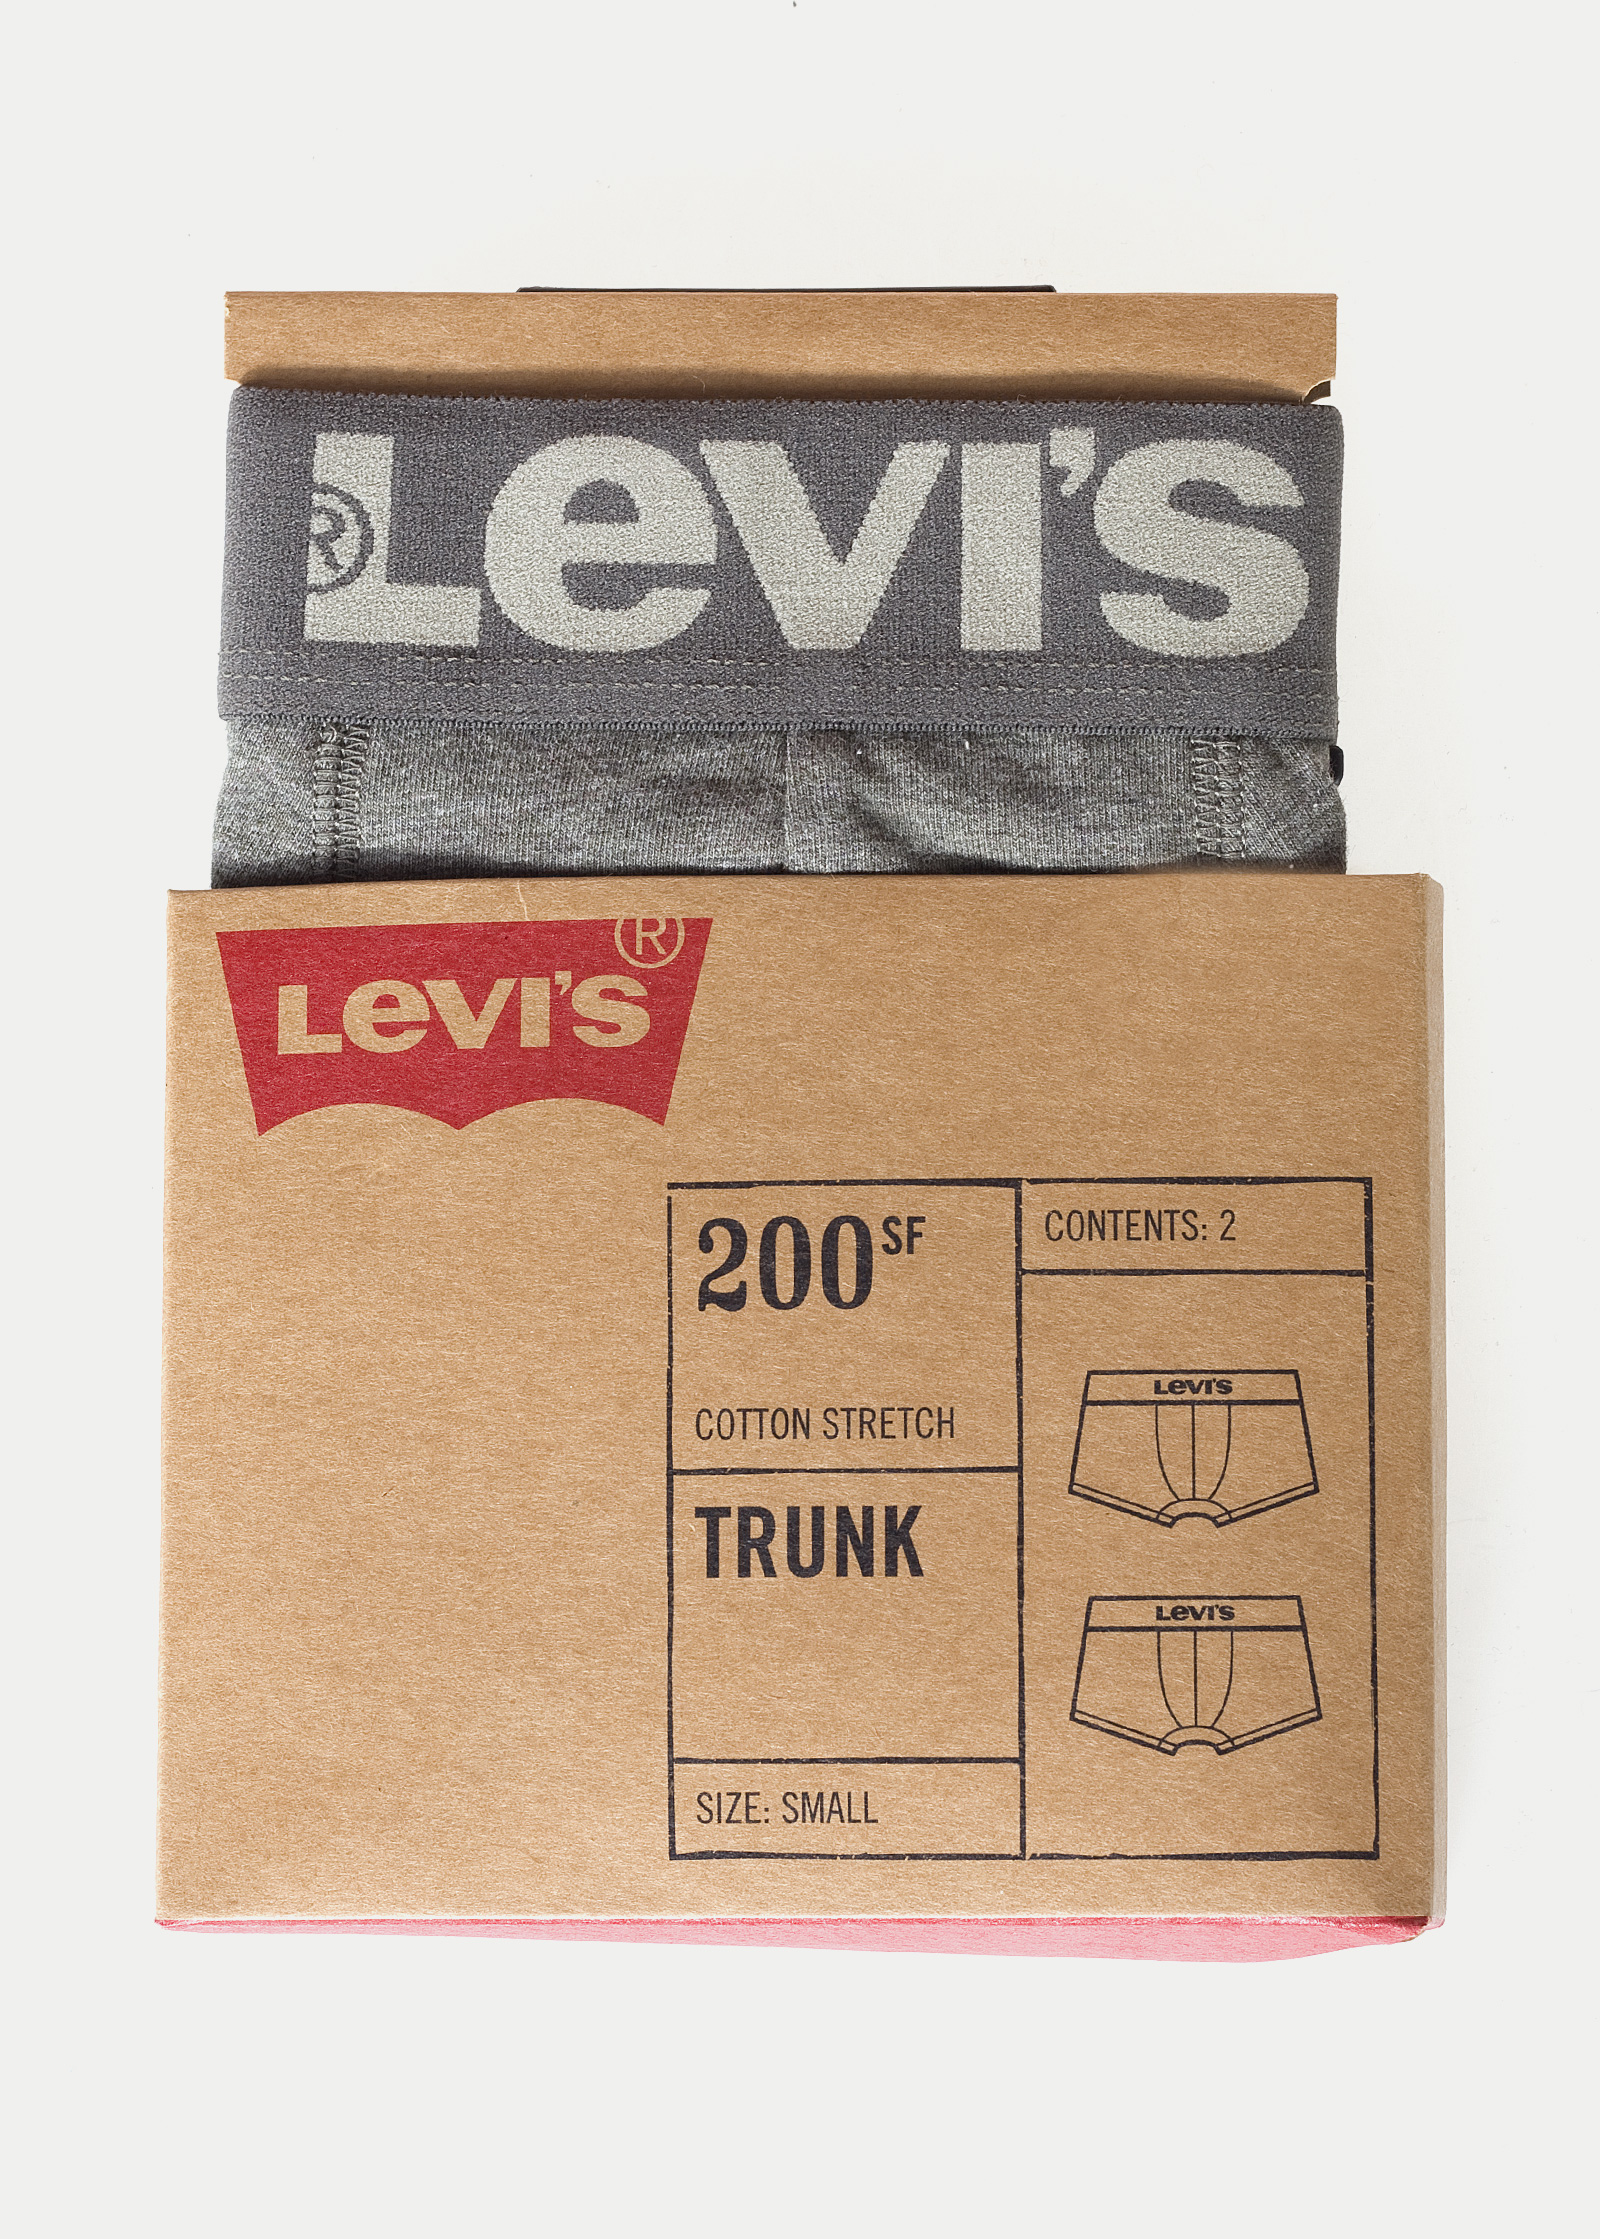 levis 200sf trunk